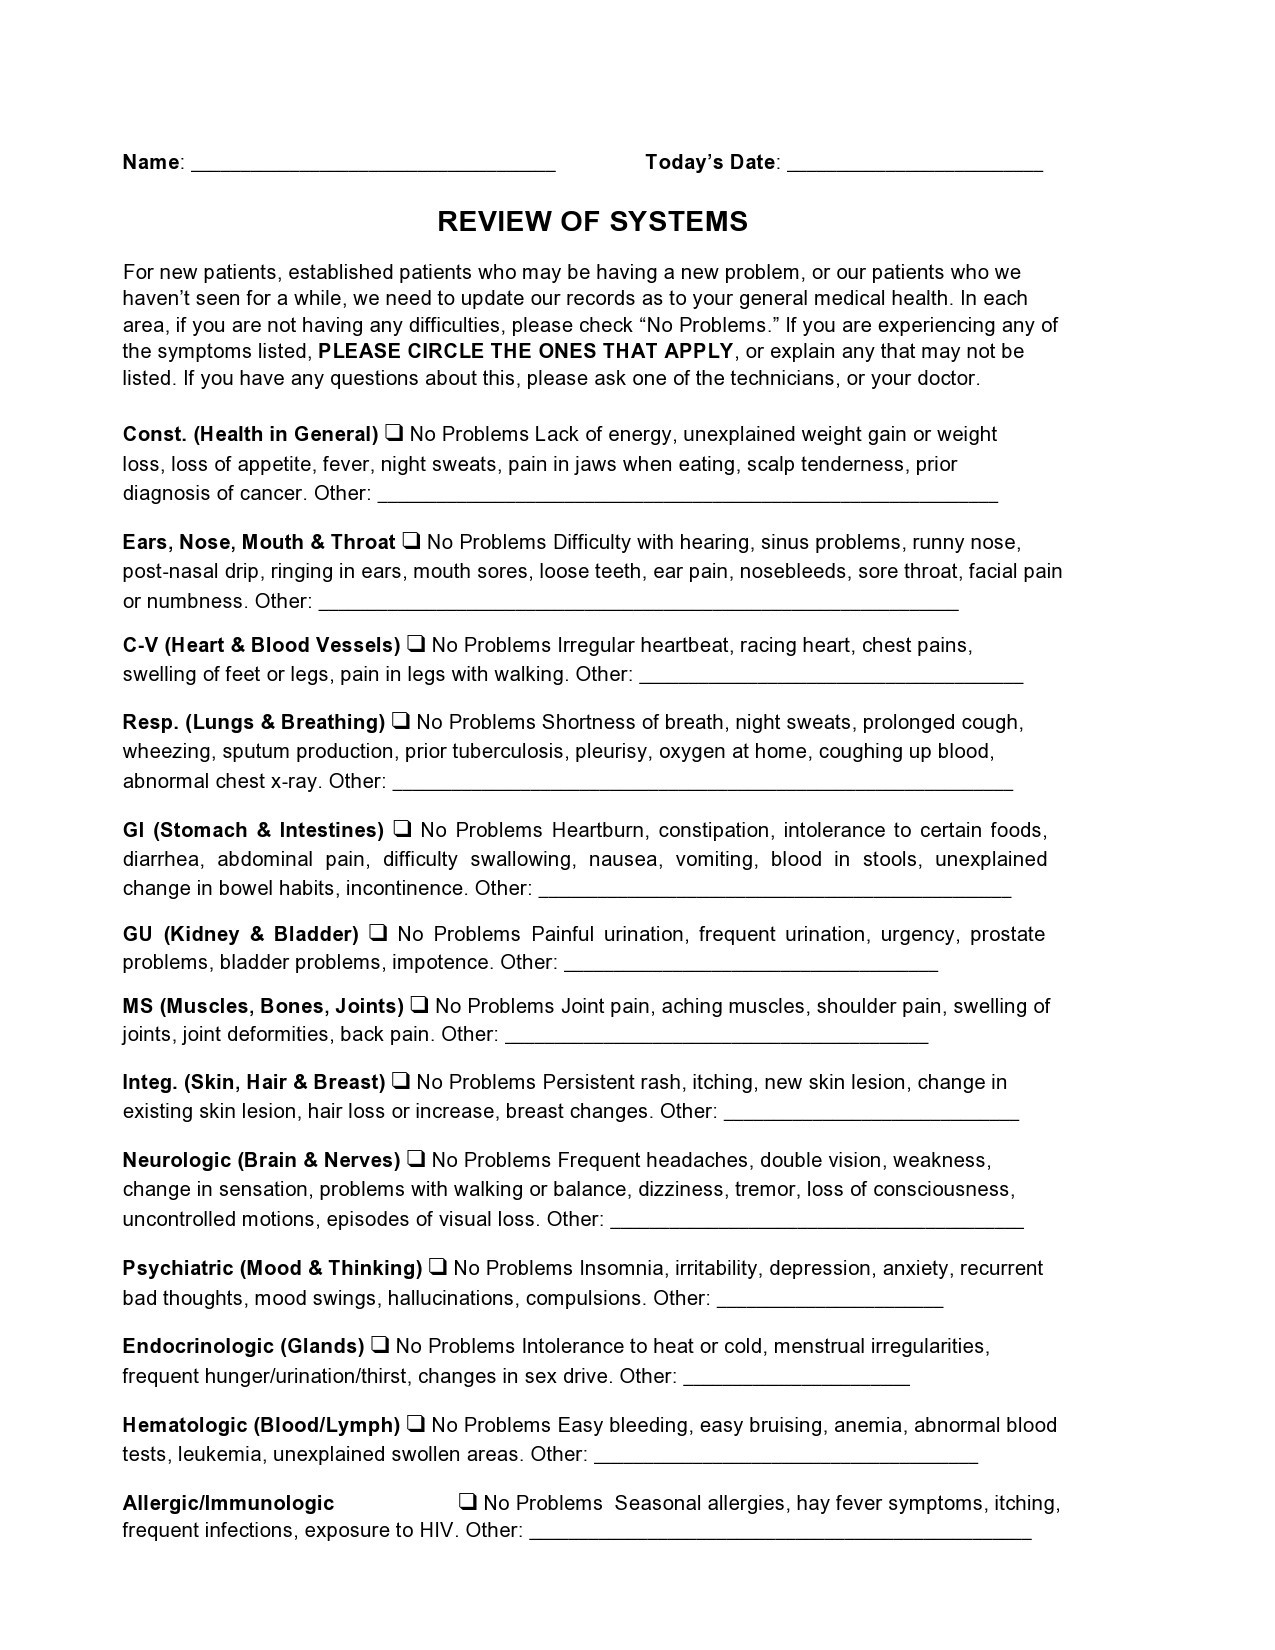 Free review of systems template 02